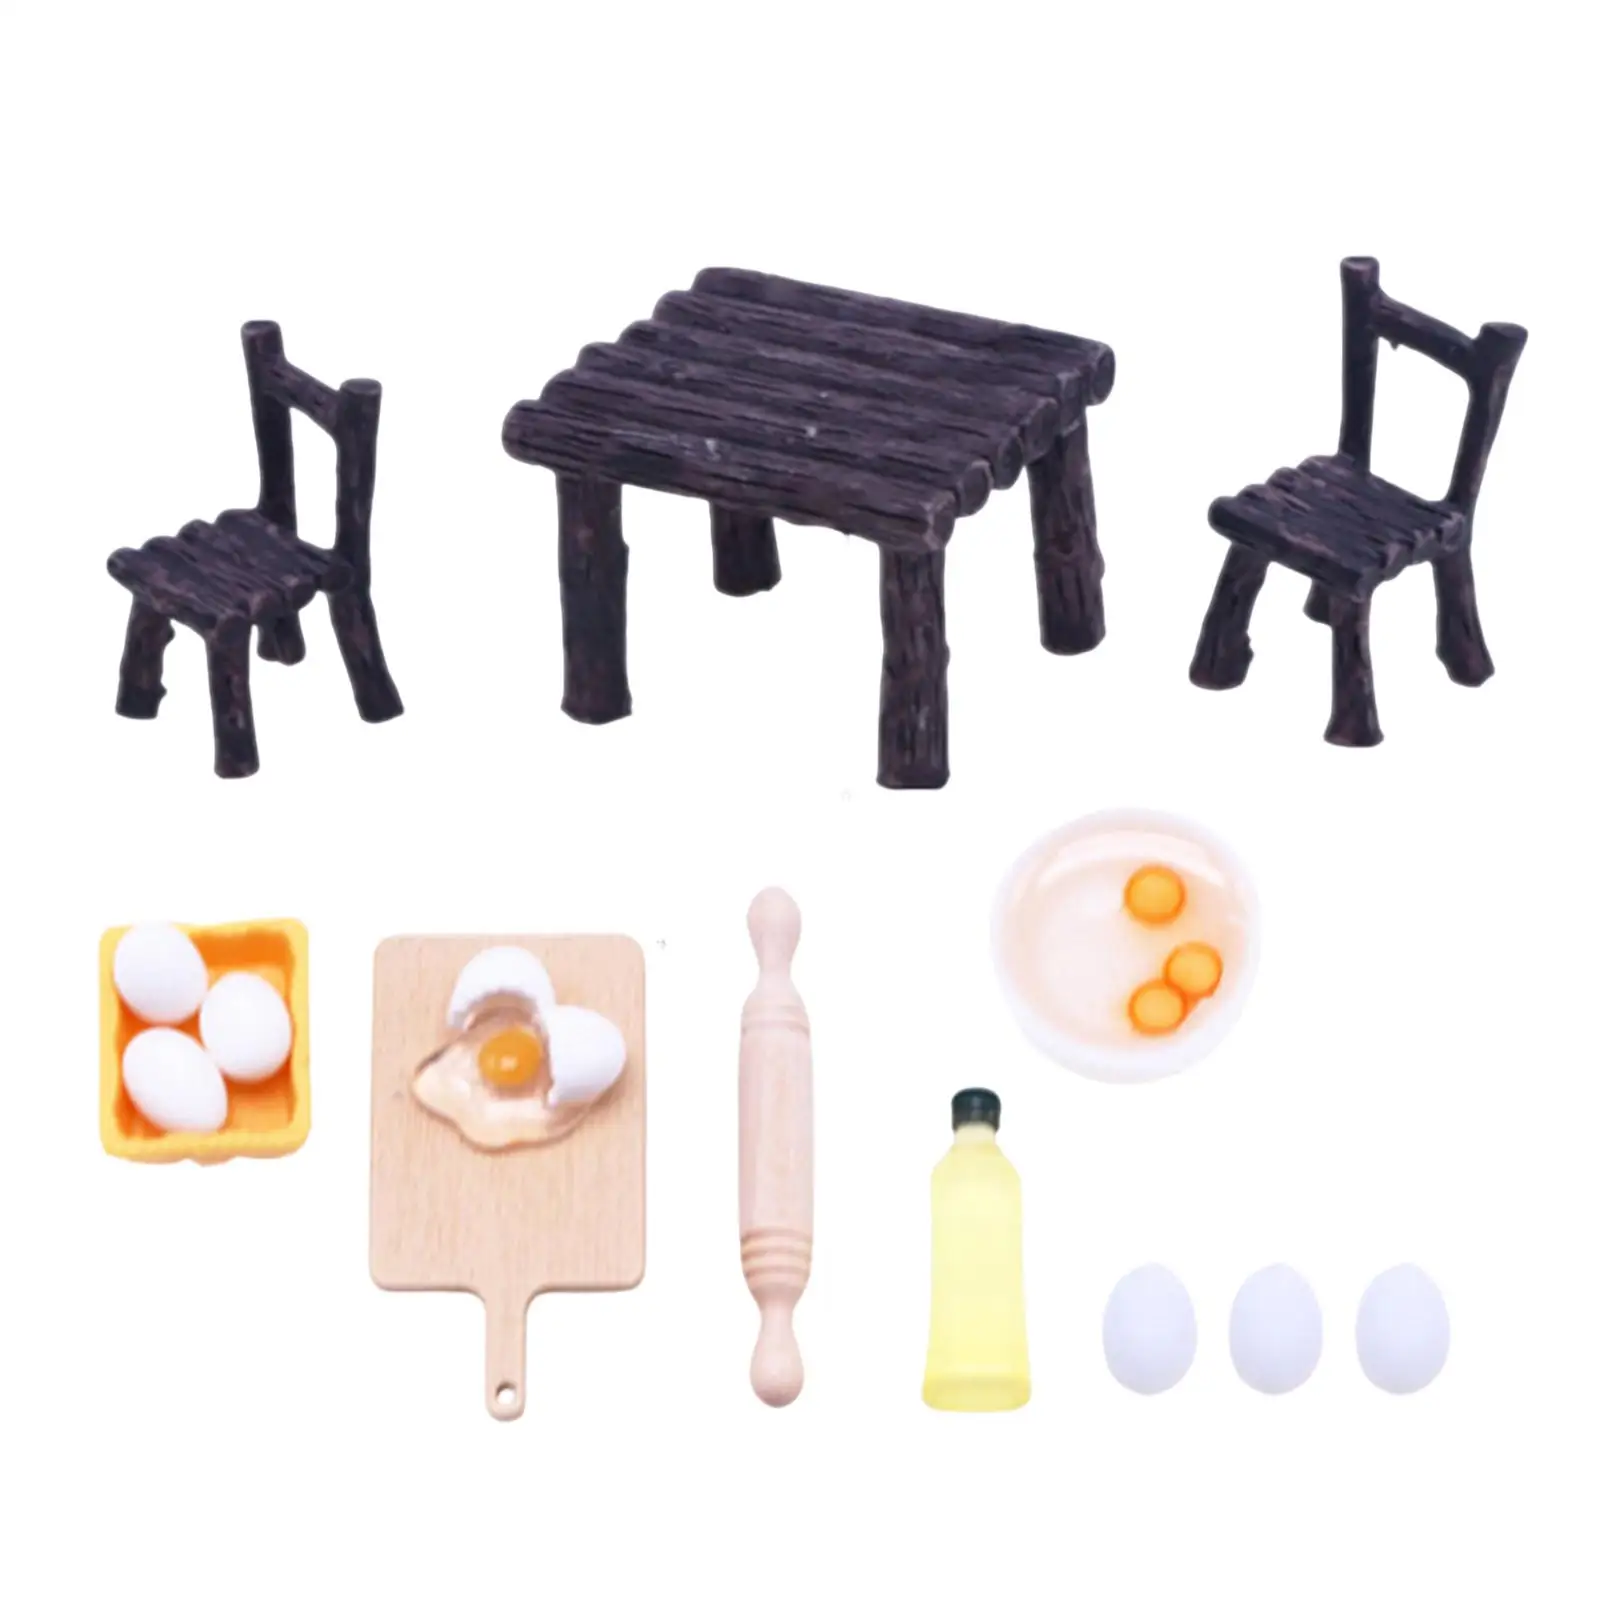 1/12 Miniature Play Sets Miniature Rolling Pin Pretend Play Set Best Gifts